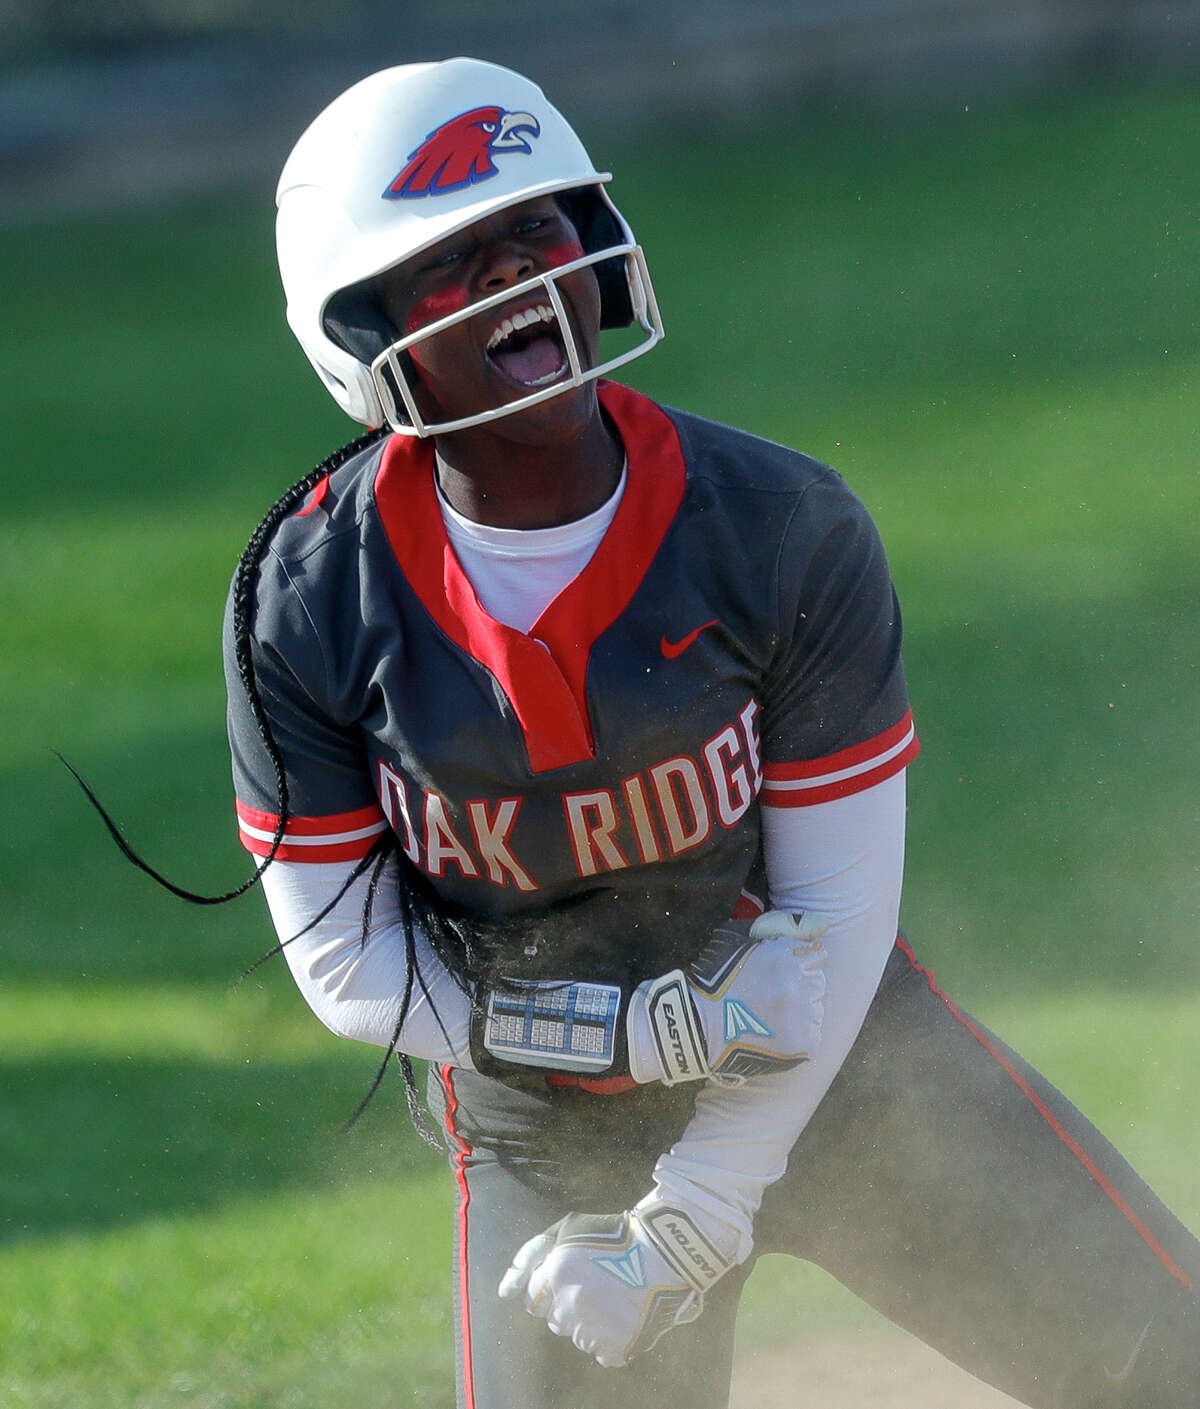 Ariel Redmond #1 of Oak Ridge reacts after advancing to third after an error by Conroe left fielder Madison Tomasek in the first inning during a District 13-6A high school softball game at Conroe High School, Wednesday, March 23, 2022, in Conroe.